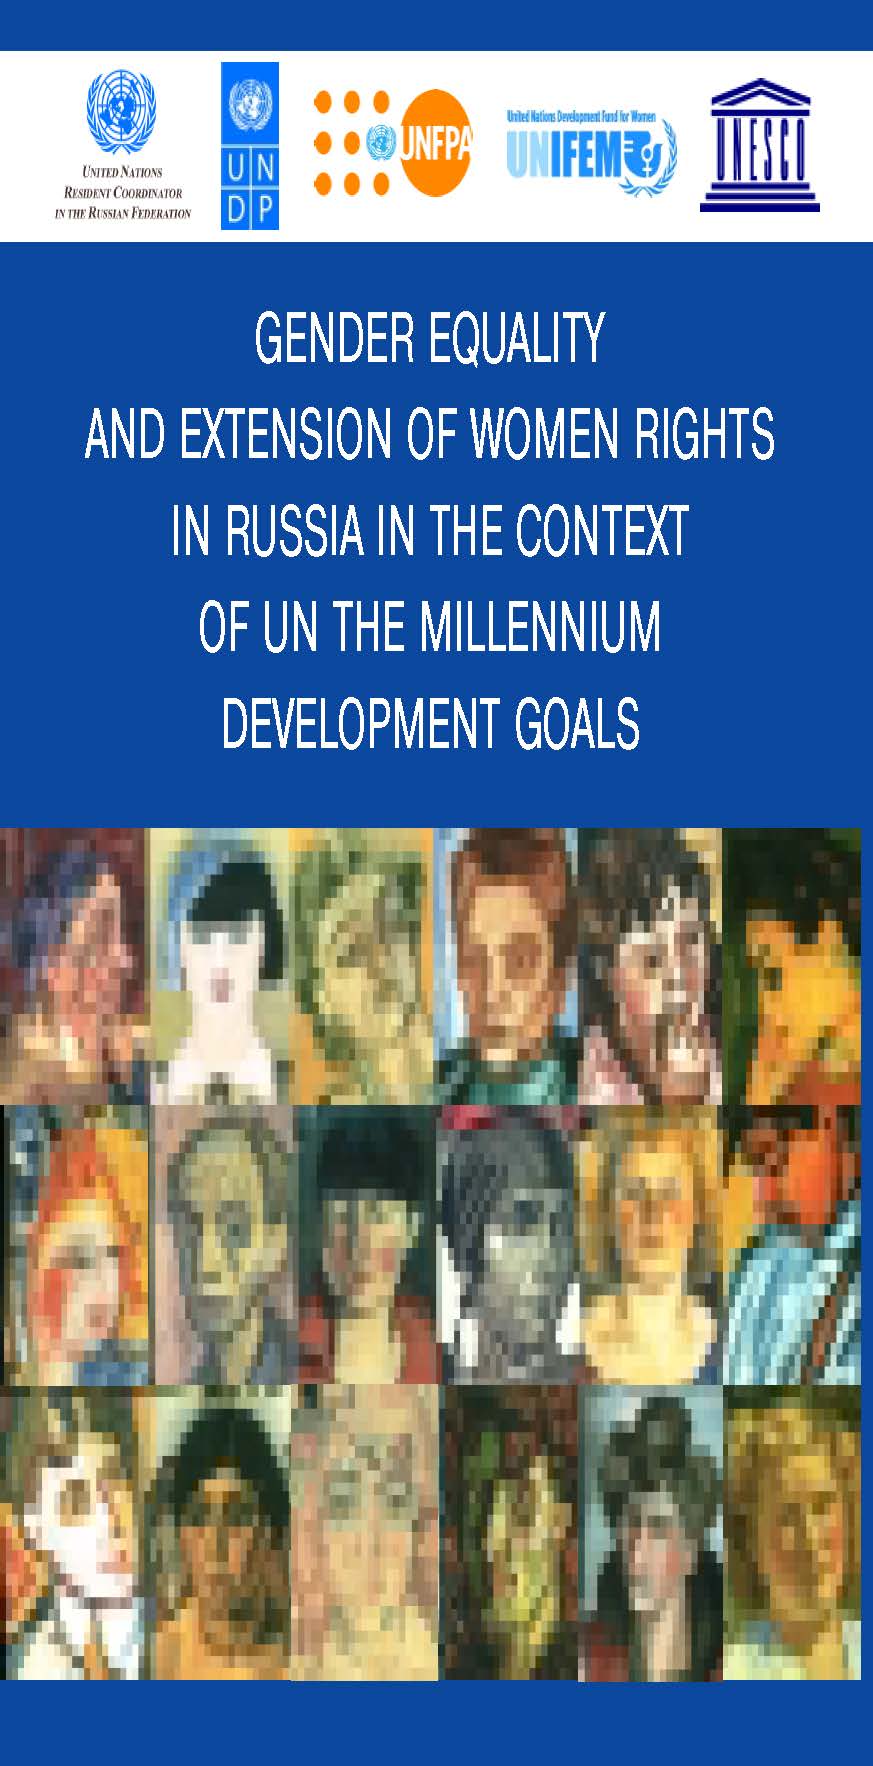 Gender equality and extension of women rights in Russia in the context of the UN Millennium Development Goals